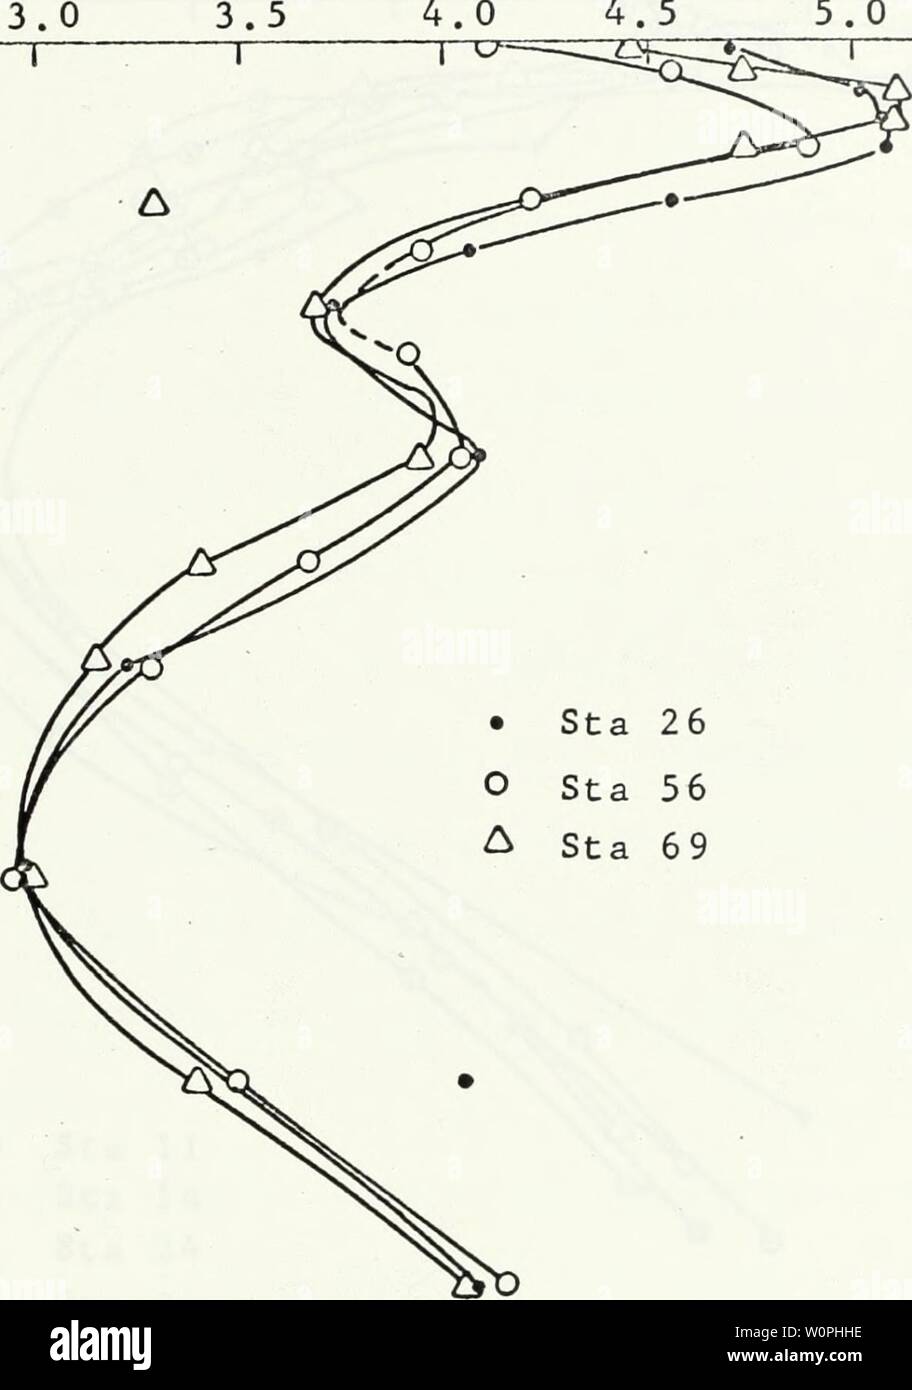 Archive image from page 66 of A description of the physical. A description of the physical oceanographic features of the eastern Gulf of Mexico, August 1968. descriptionofphy00schn Year: 1969  20 2.5 Dissolved oxygen in ml/1 3.0 3.5 4.0 4.5 1    - 200   400 w U V 4-1 a) E a •H .£3 a, Q - 600 - 800 • Sta 26 O Sta 56 A Sta 69 -1000 -12 00 Figure 4 Vertical distribution of dissolved oxygen for stations in right-hand water in the eastern Gulf of Mexico, cruise 68-A-8. Stock Photo